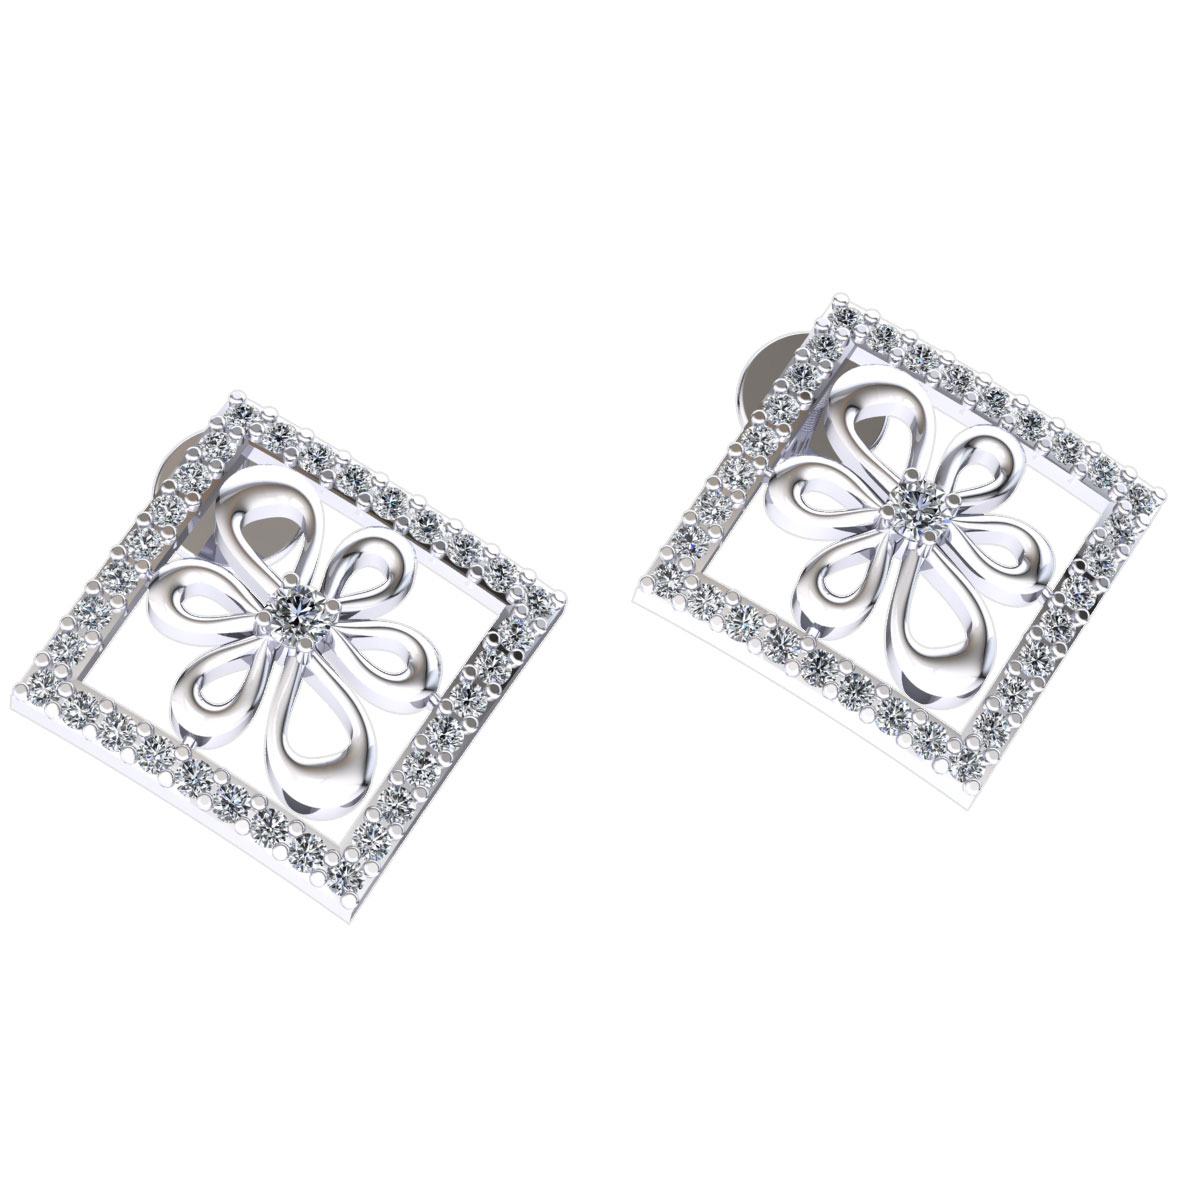 Details about   0.35ctw Genuine Round Cut Diamond Ladies Flower Square Earrings Solid 10K Gold 